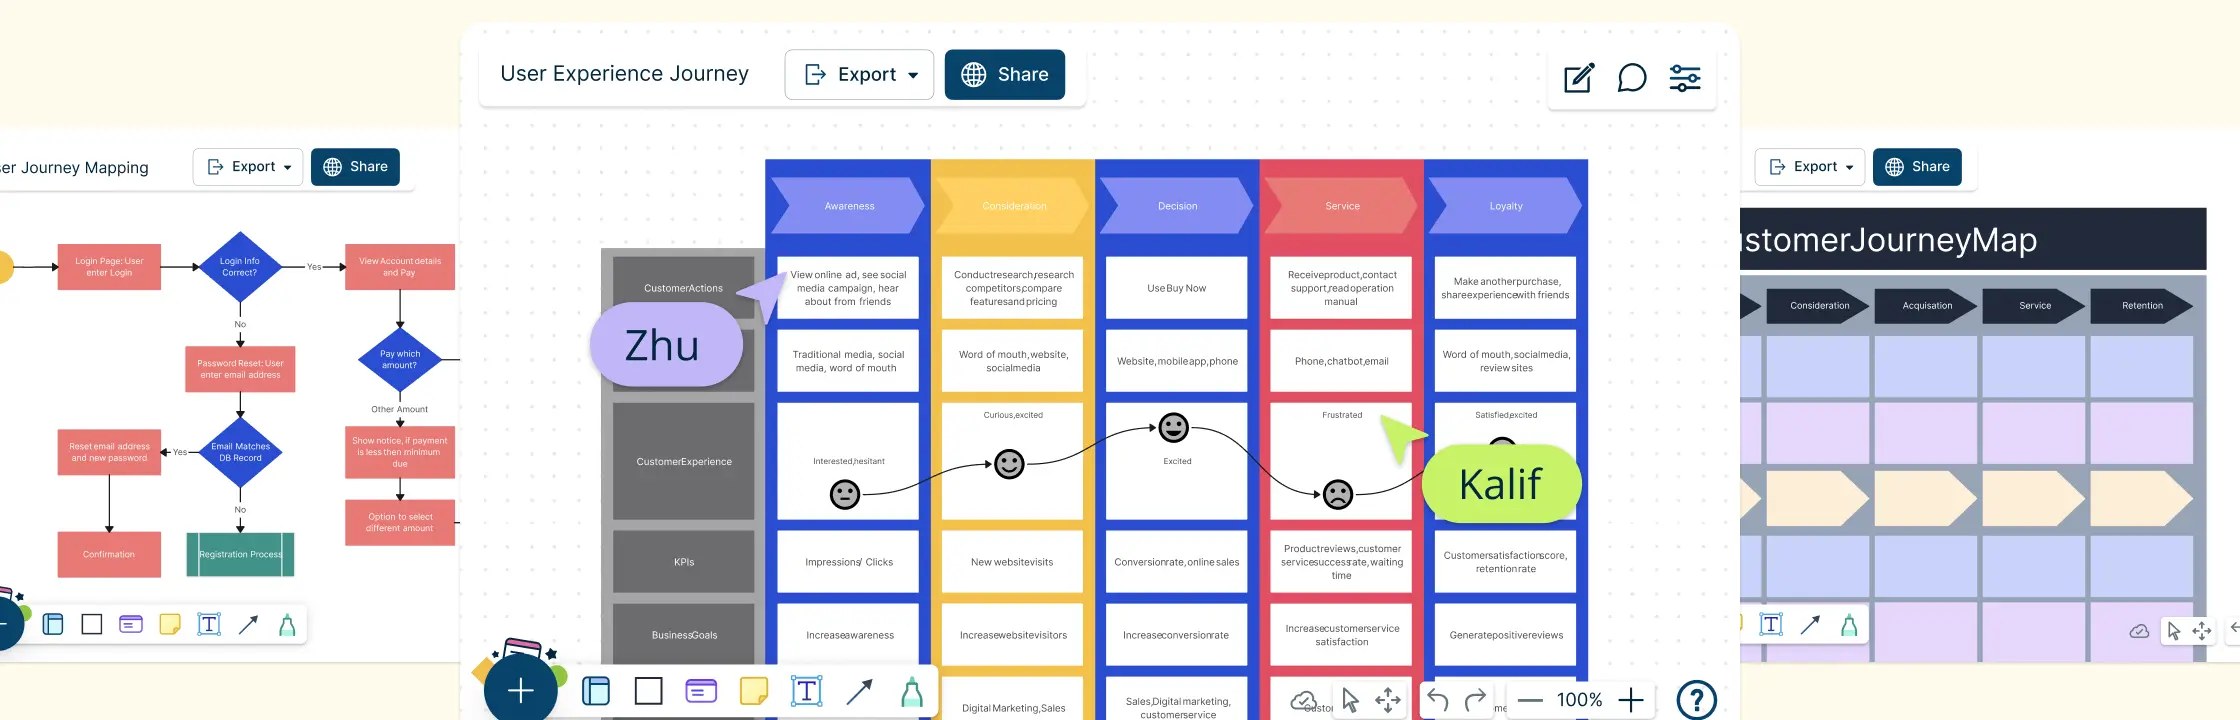 Mastering User Experience Mapping for Superior Product Design